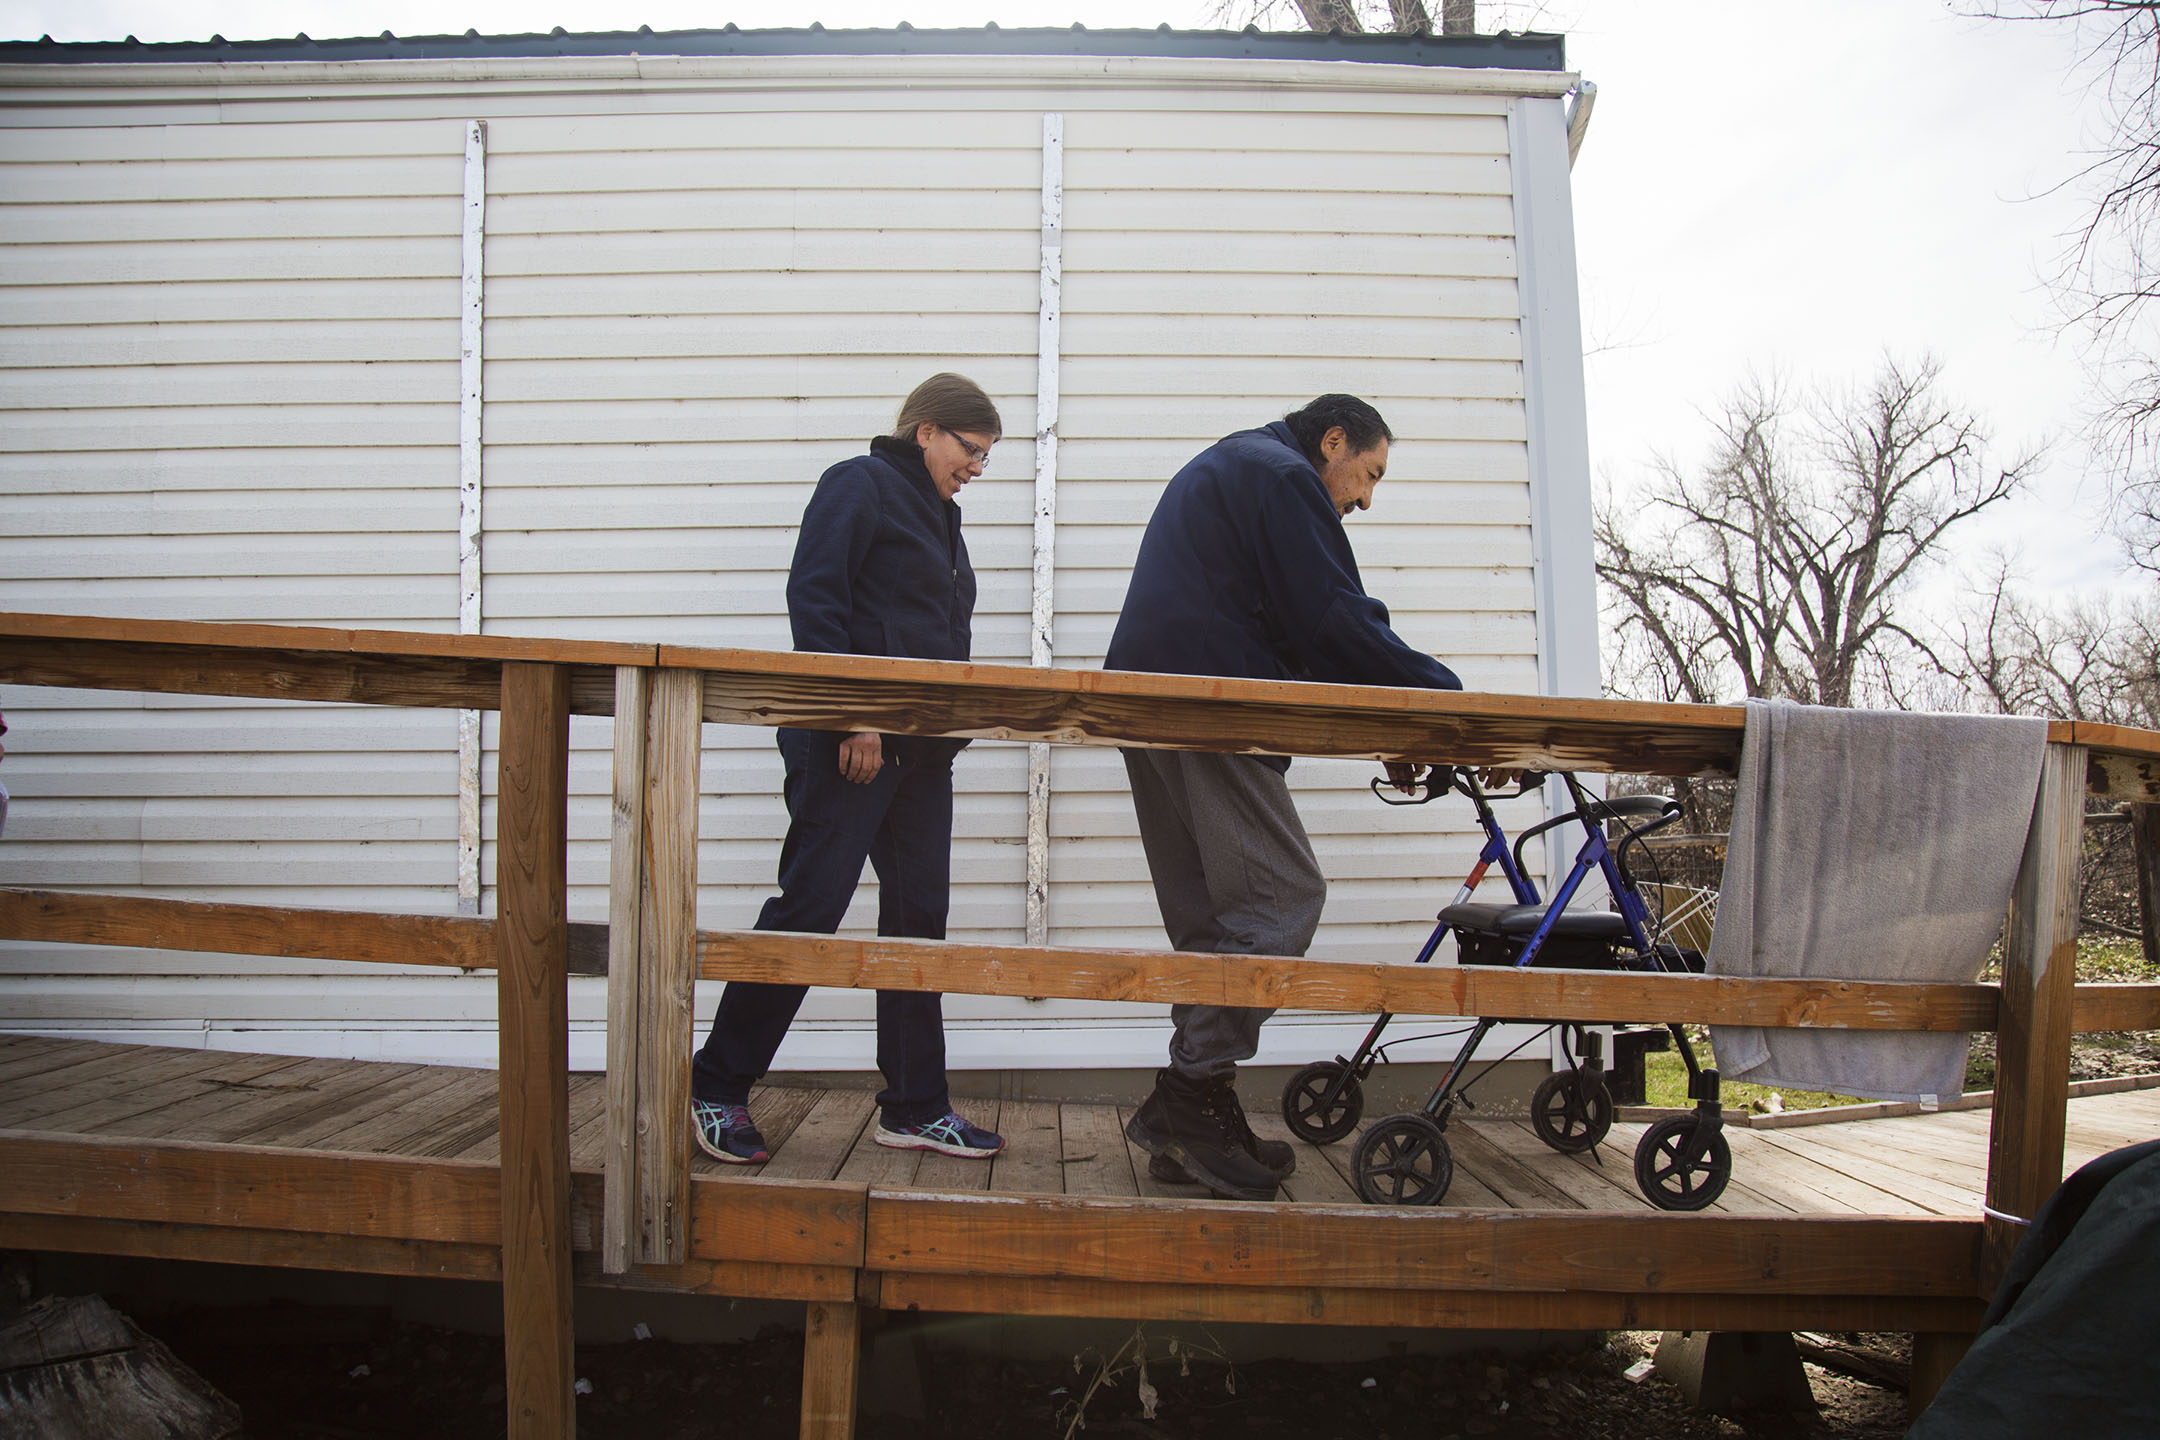 Patti Medicinehorse, left, and Thomas Larson Medicinehorse, right, make their way down the ramp in front of their home in Crow Agency. Their home is a FEMA trailer that they received after their old home was submerged in water after the Little Big Horn River flooded Crow Agency in May 2011.